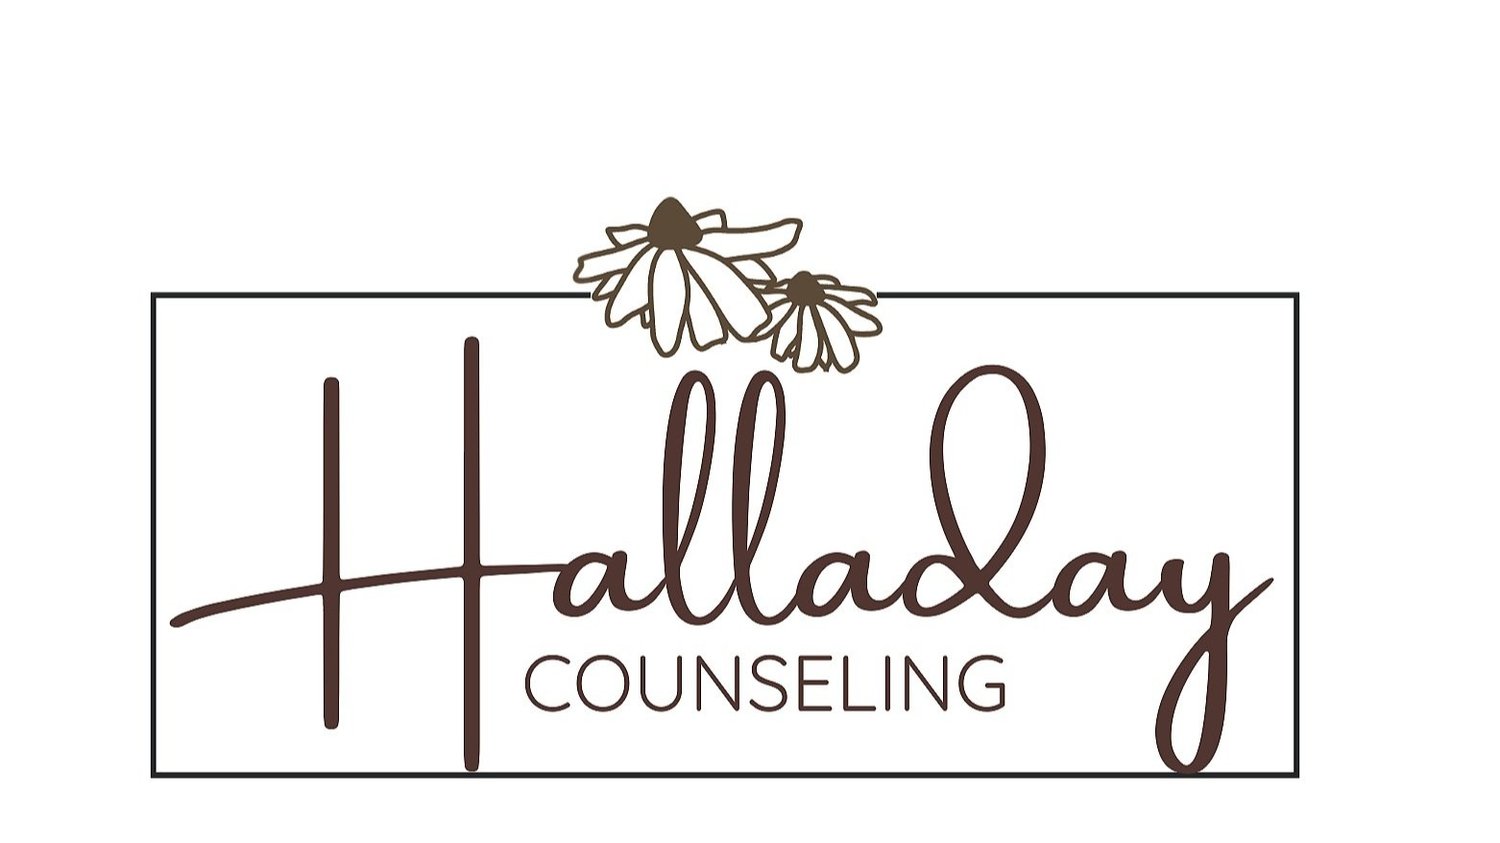 Halladay Counseling 